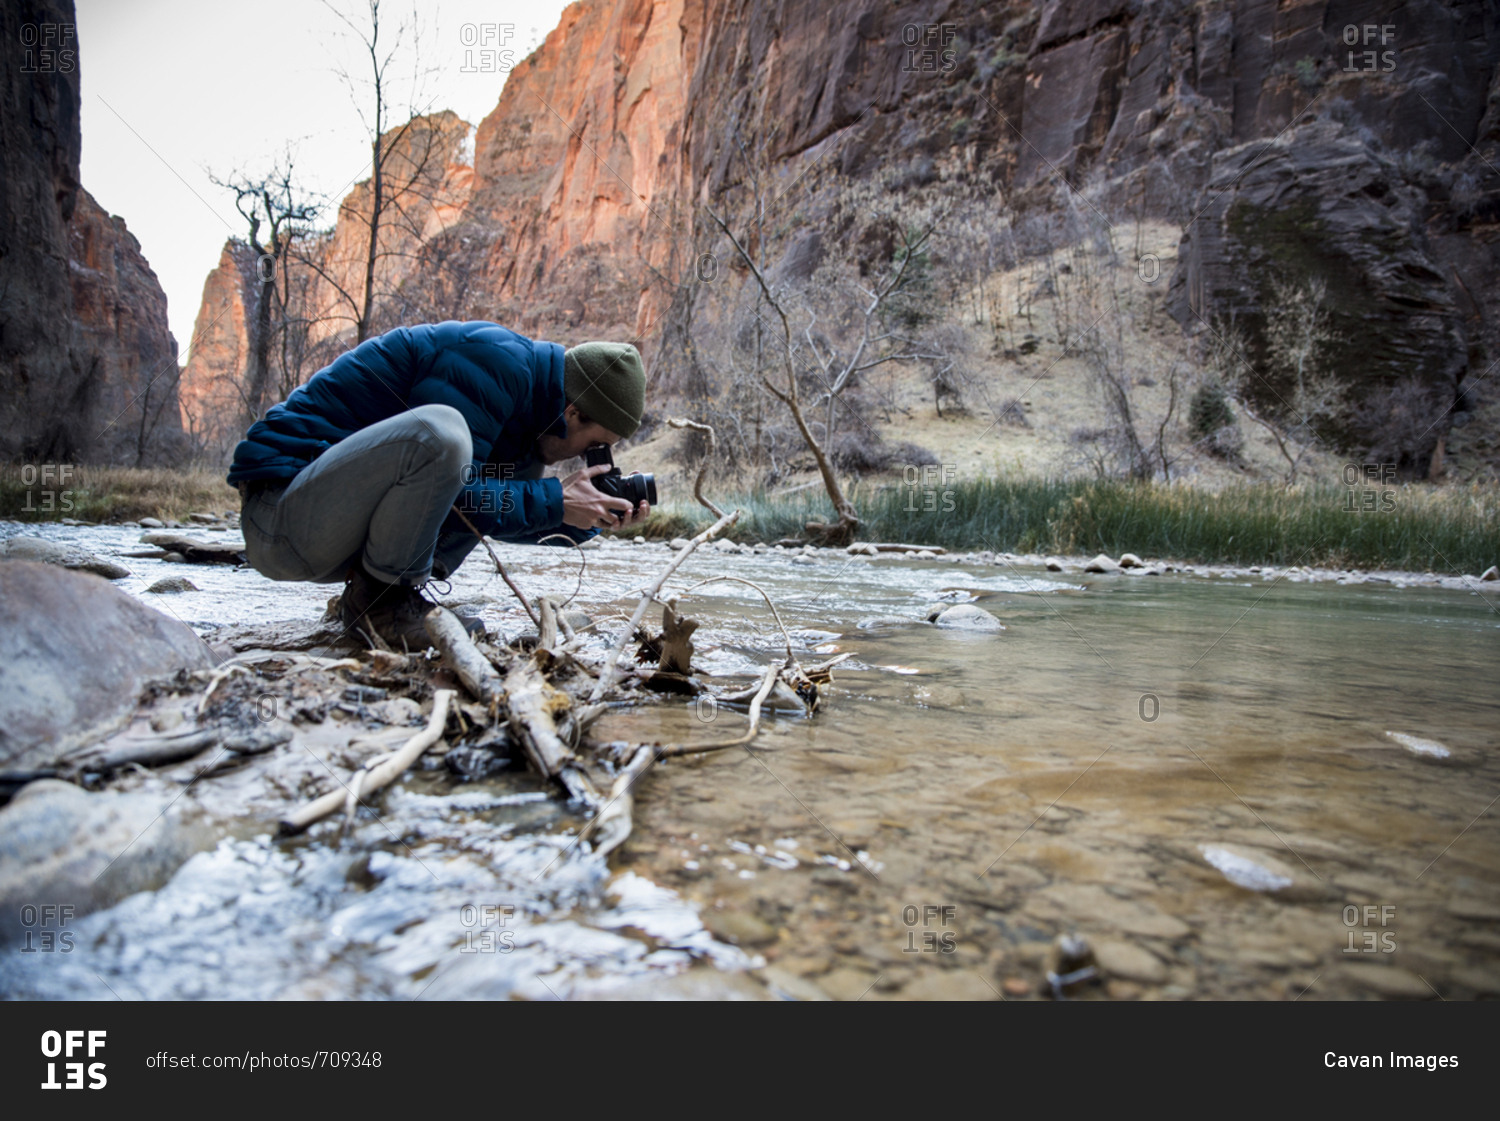 Side view of man photographing with camera while crouching by stream against rock formations